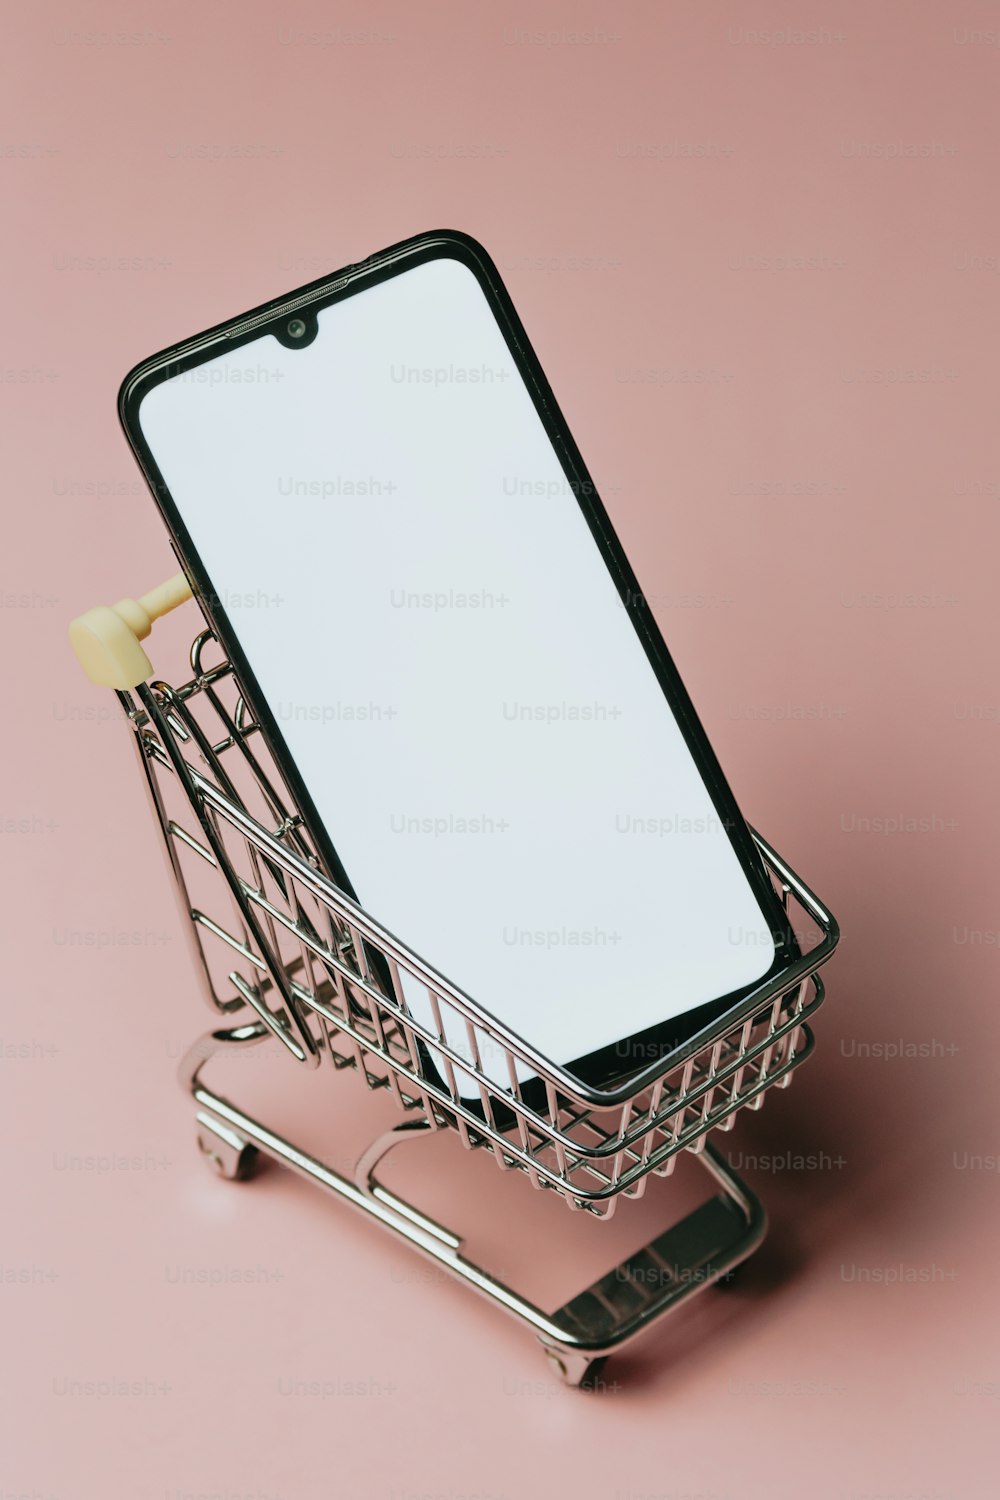 a shopping cart with a cell phone in it